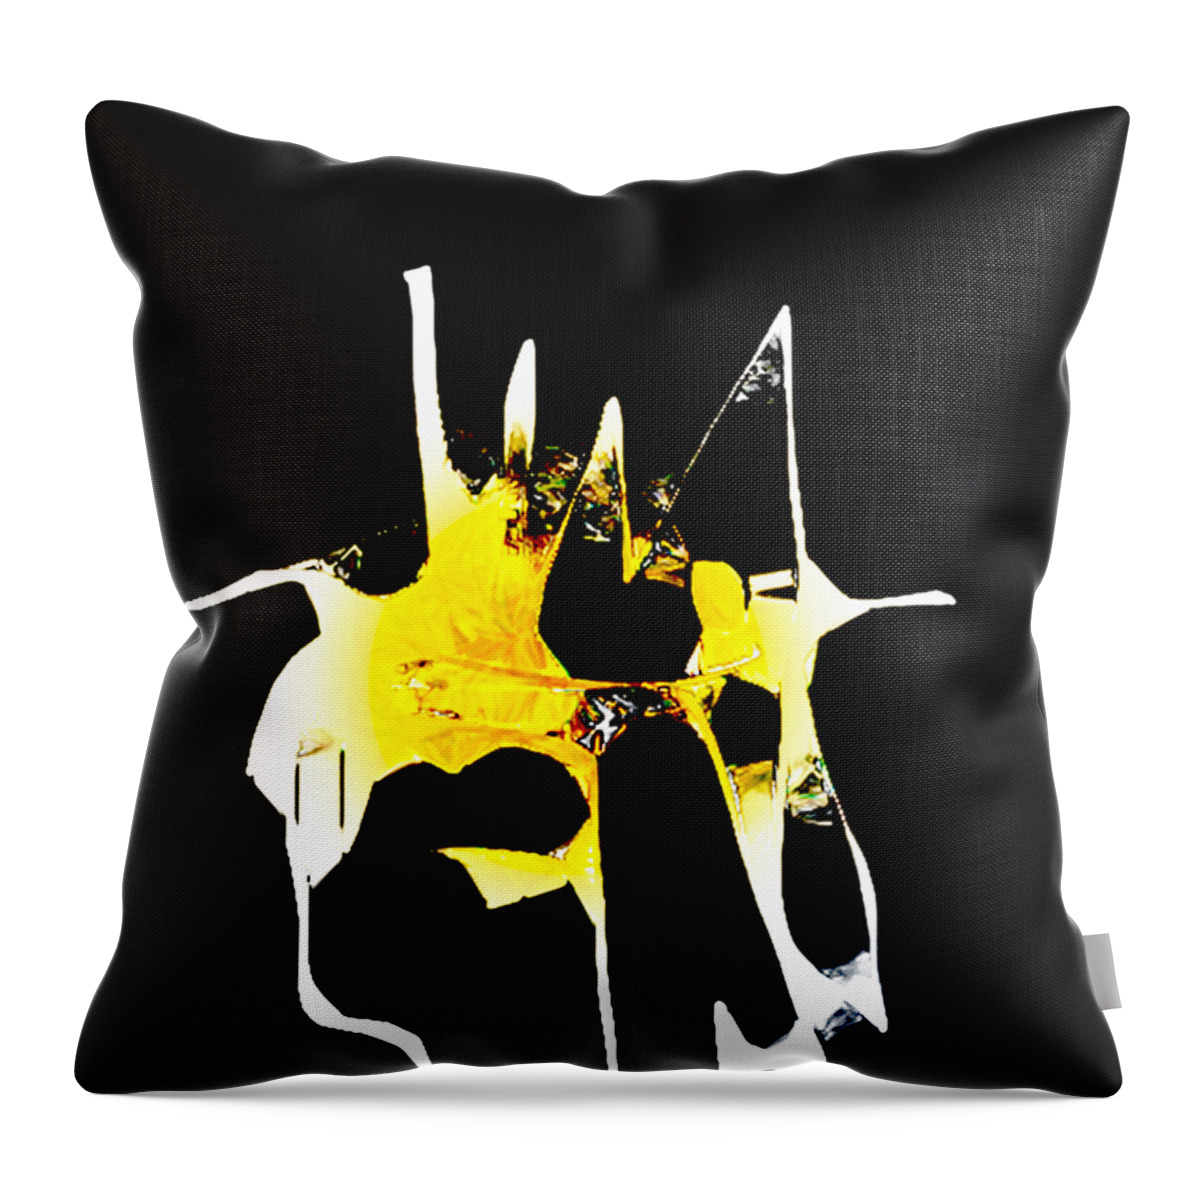 Fight Throw Pillow featuring the digital art Duel by Asok Mukhopadhyay